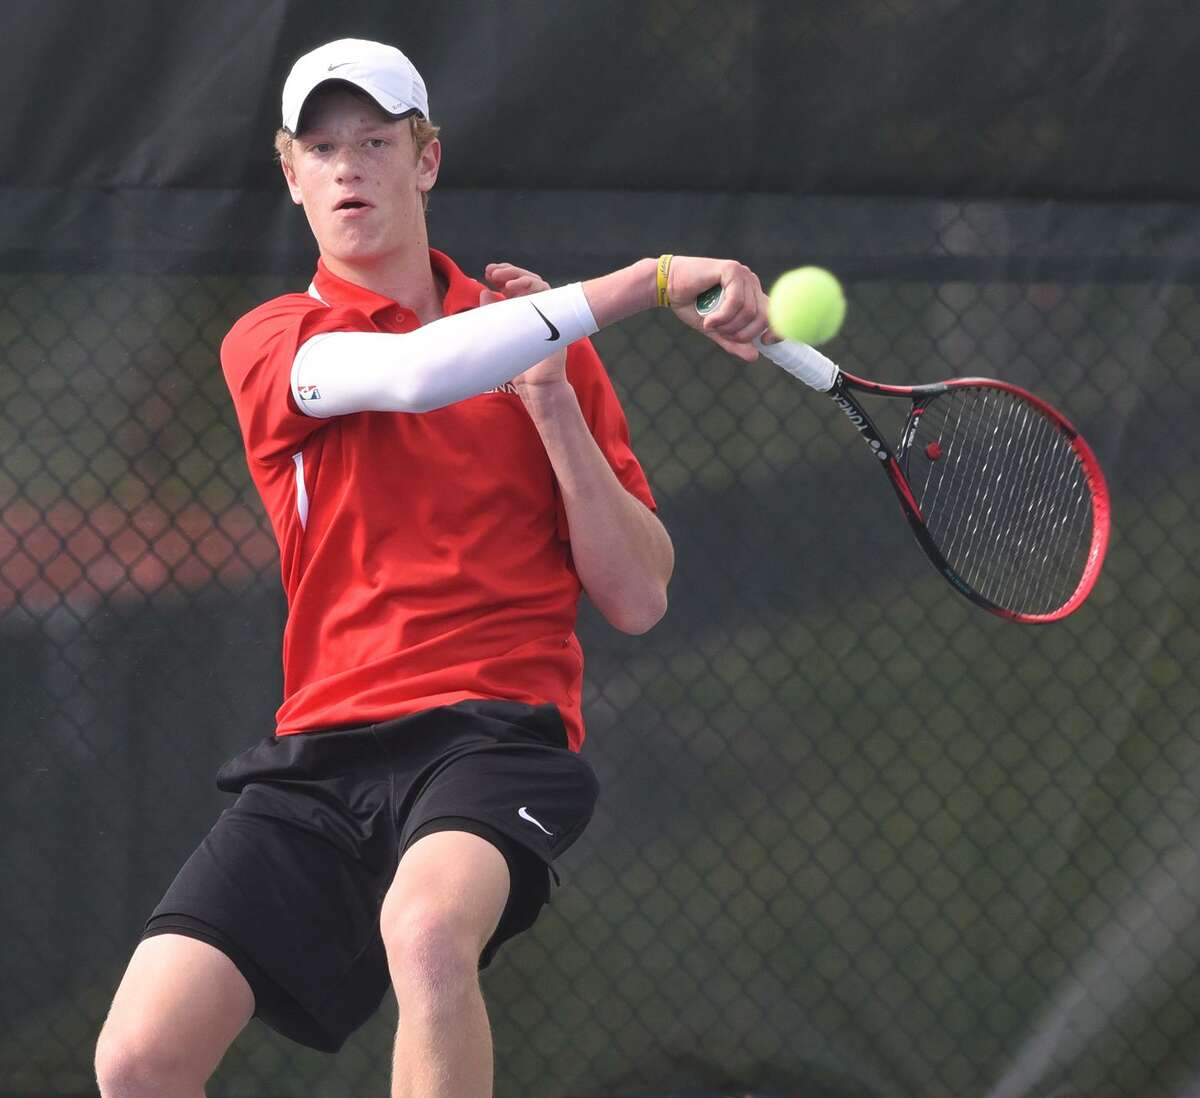 New Canaan’s Matt Brand returns a shot during his No. 1 singles match against Darien’s MIchael Karr in the FCIAC boys tennis semifinals at New Canaan High School on Thursday, May 16, 2019.